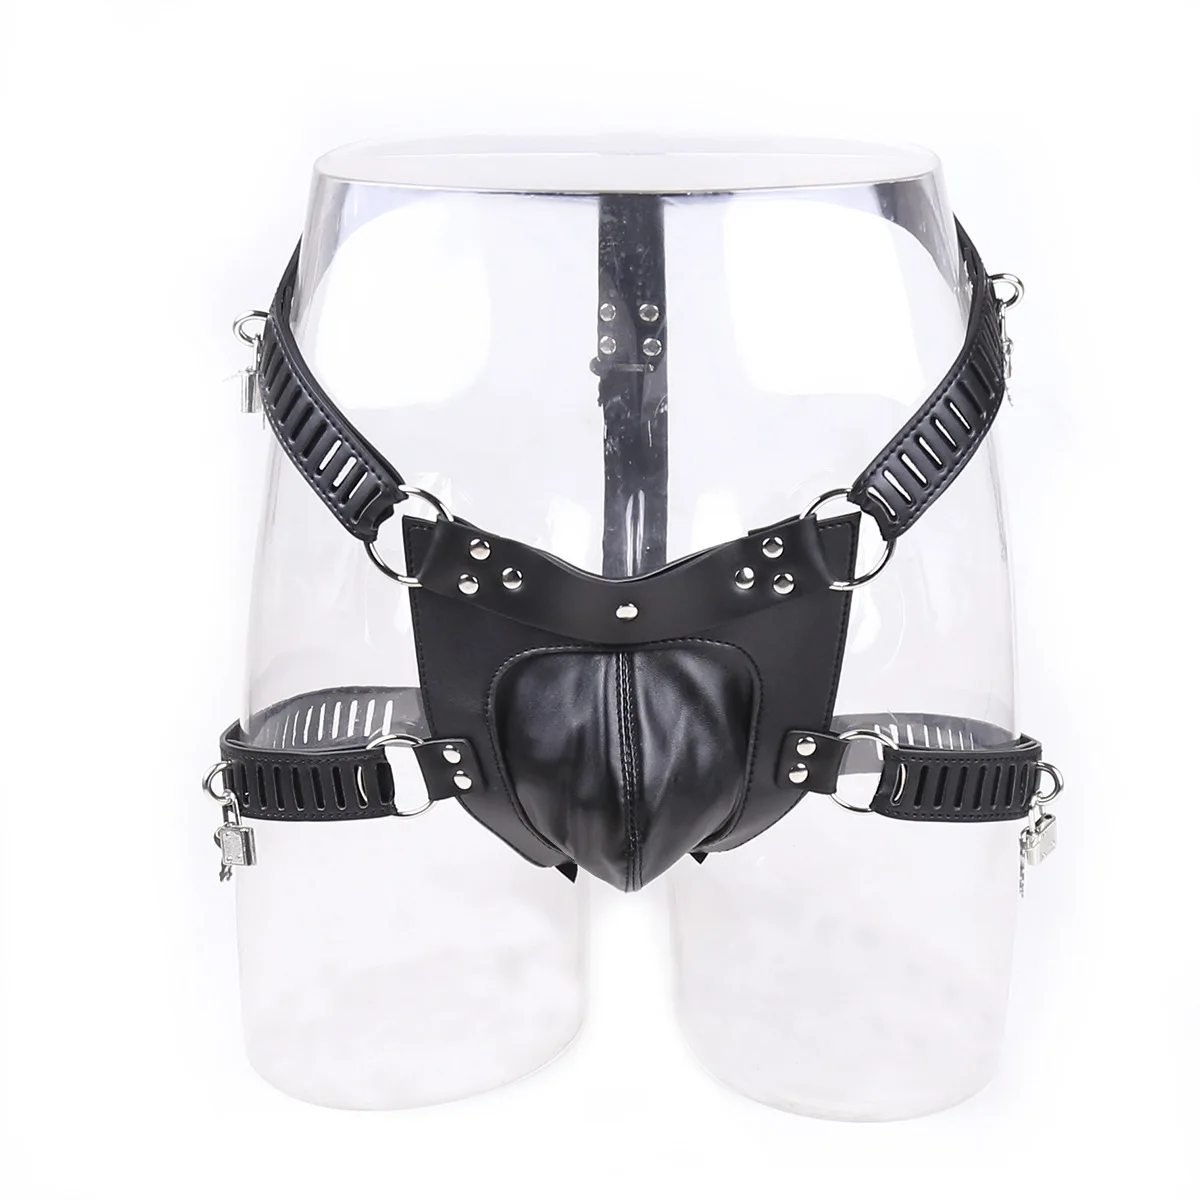 

BDSM PU Leather Sexy Panties Bondage Fetish Restraints Penis Cock Cage Male Chastity Devices Belt Erotic Cosplay Toys For Couple